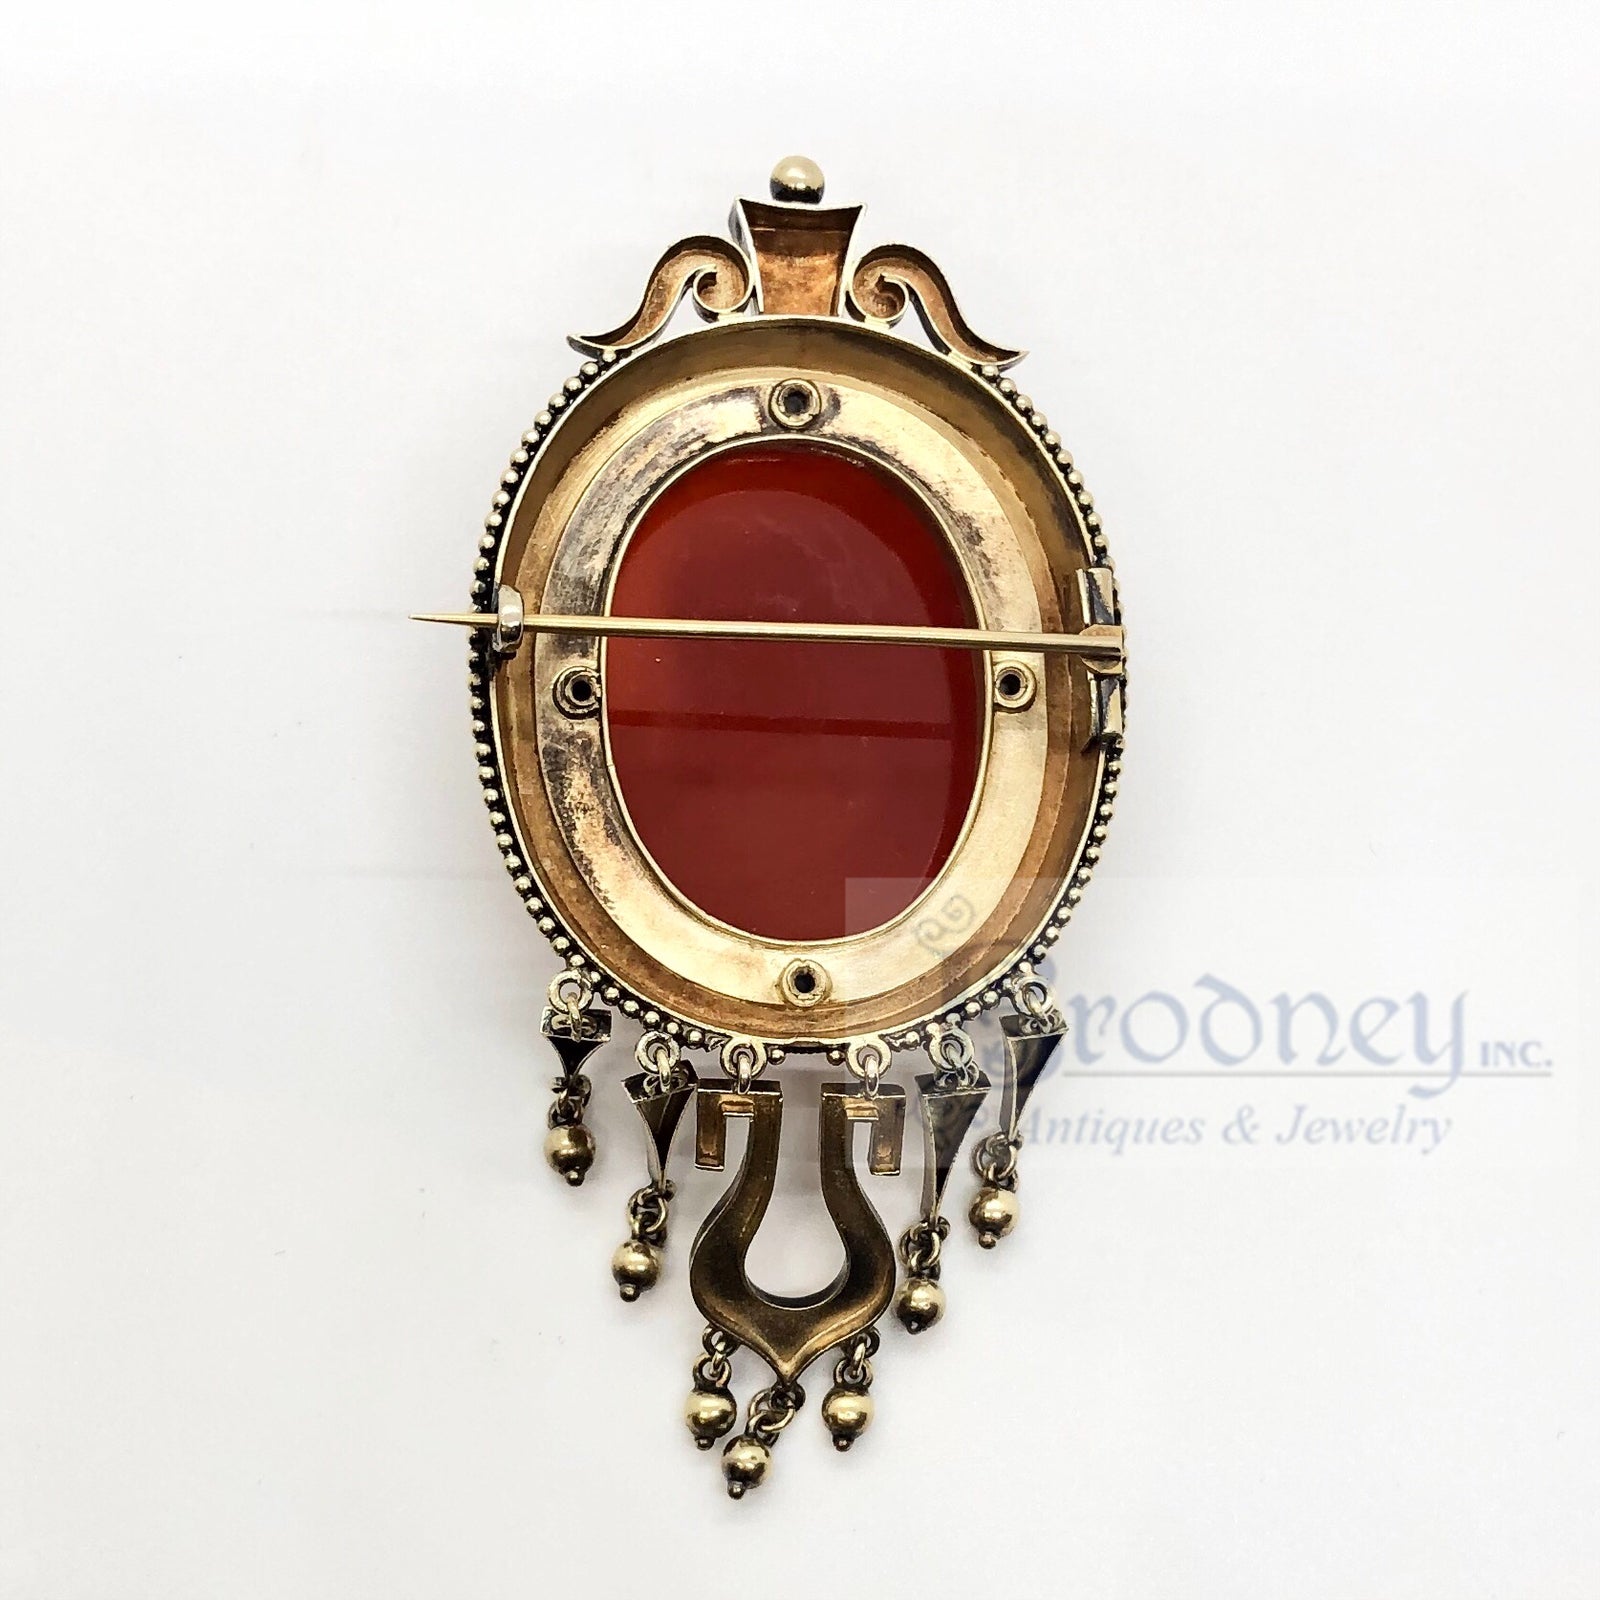 14kt Gold Carved Stone Cameo Brooch